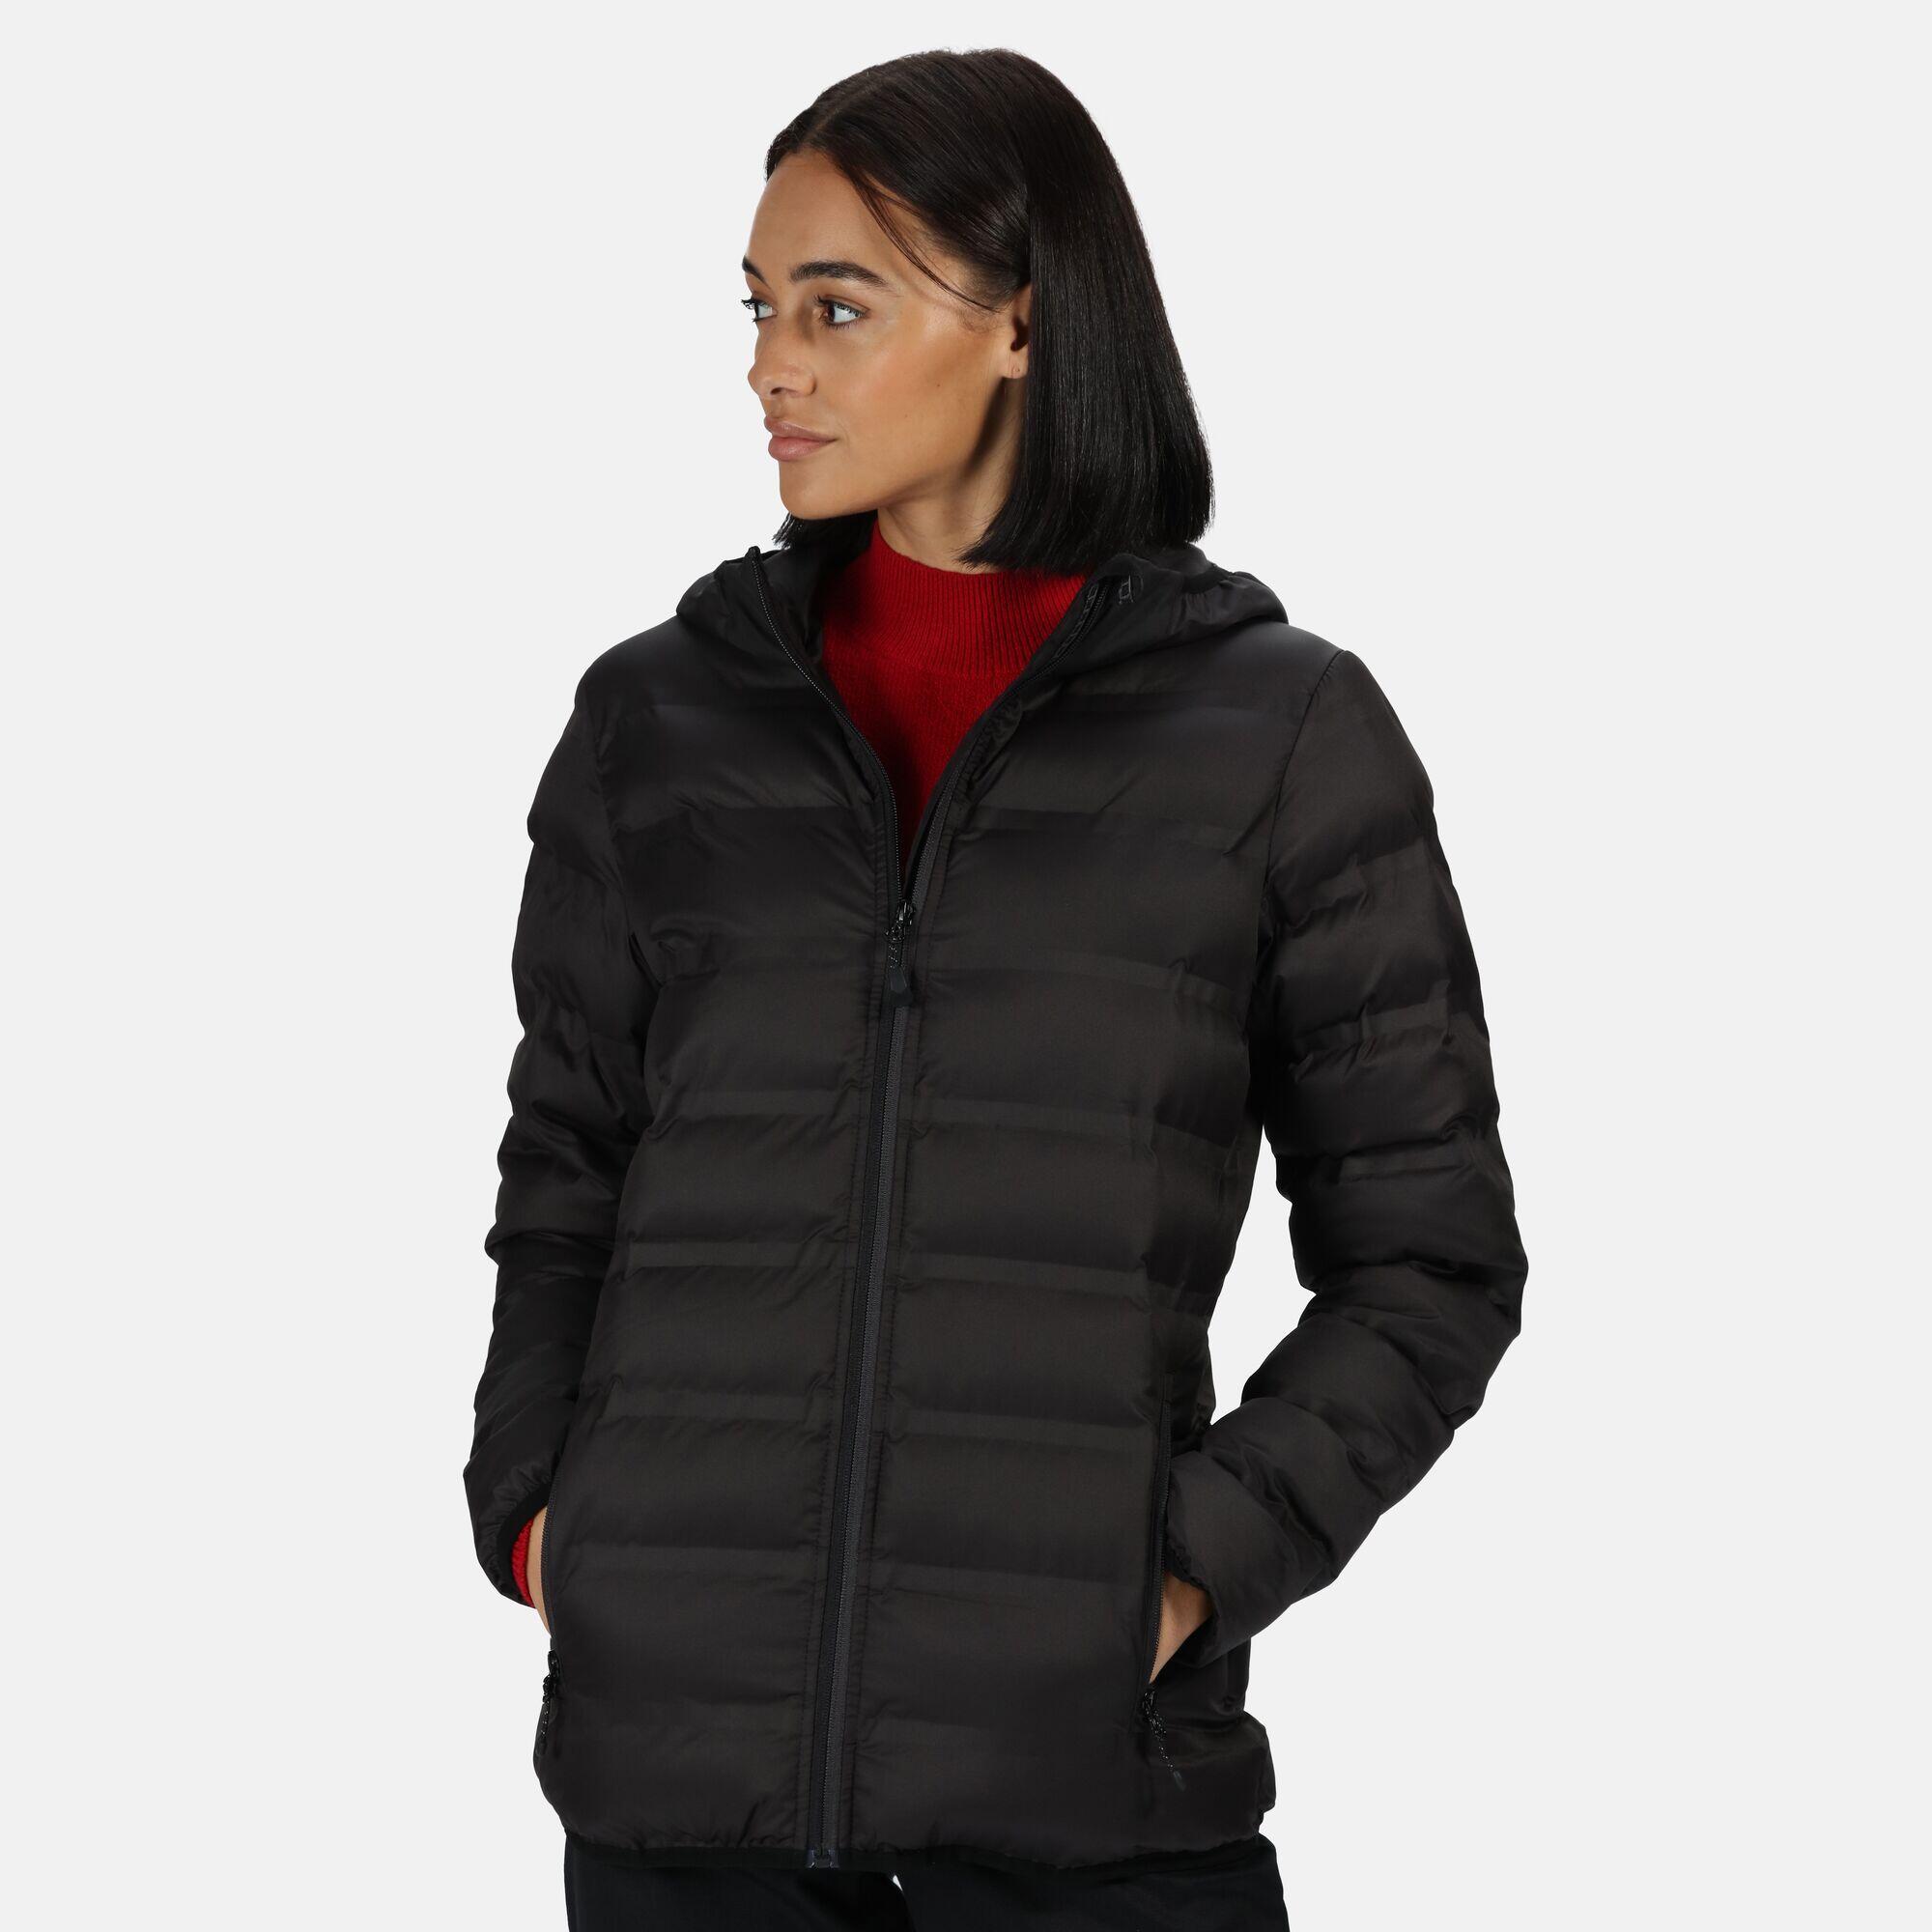 Womens/Ladies XPro Icefall III Insulated Jacket (Black) 4/5